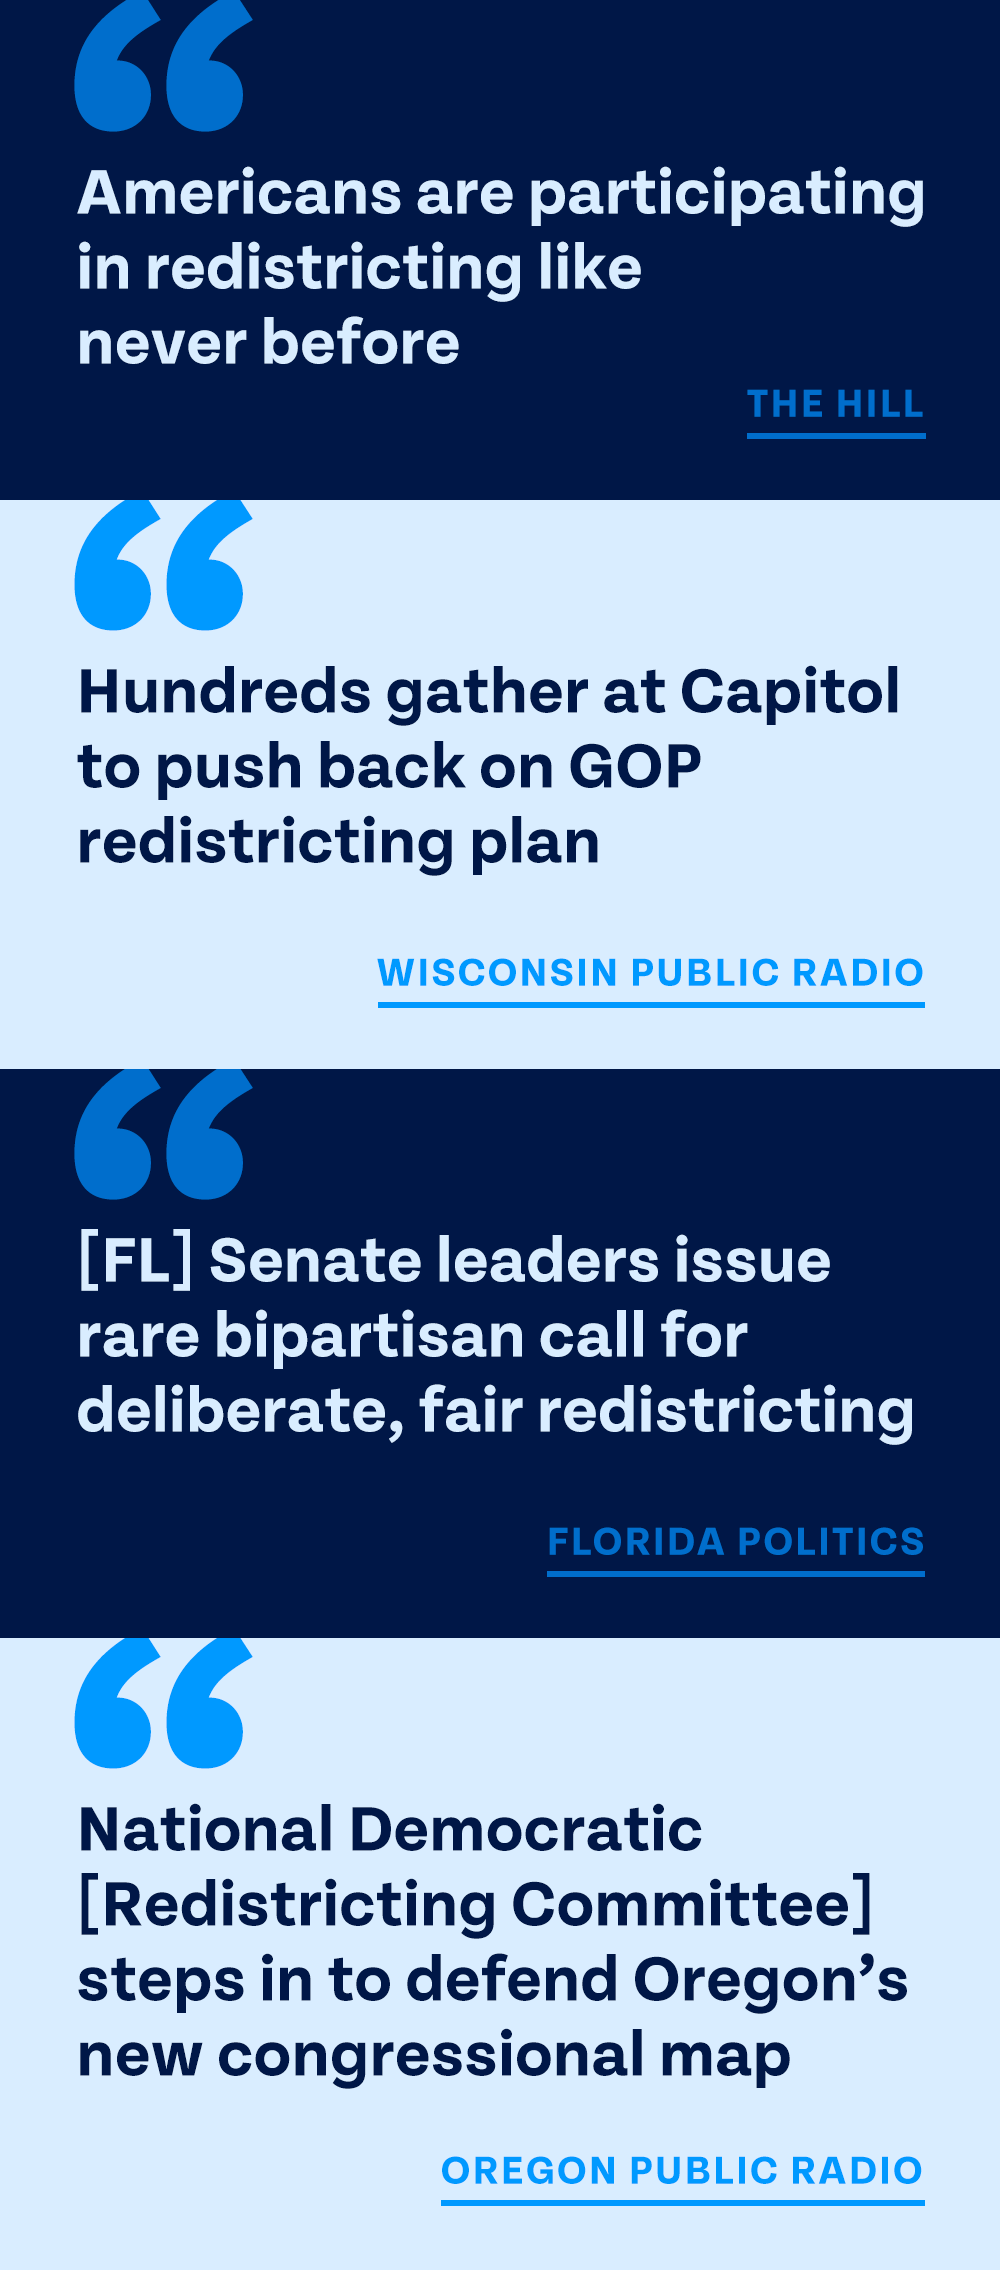 The Hill: Americans are participating in redistricting like never before
Wisconsin Public Radio: Hundreds gather at Capitol to push back on GOP redistricting plan
Florida Politics: [FL] Senate leaders issue rare bipartisan call for deliberate, fair redistricting
Oregon Public Radio: National Democratic [Redistricting Committee] steps in to defend Oregon’s new congressional map